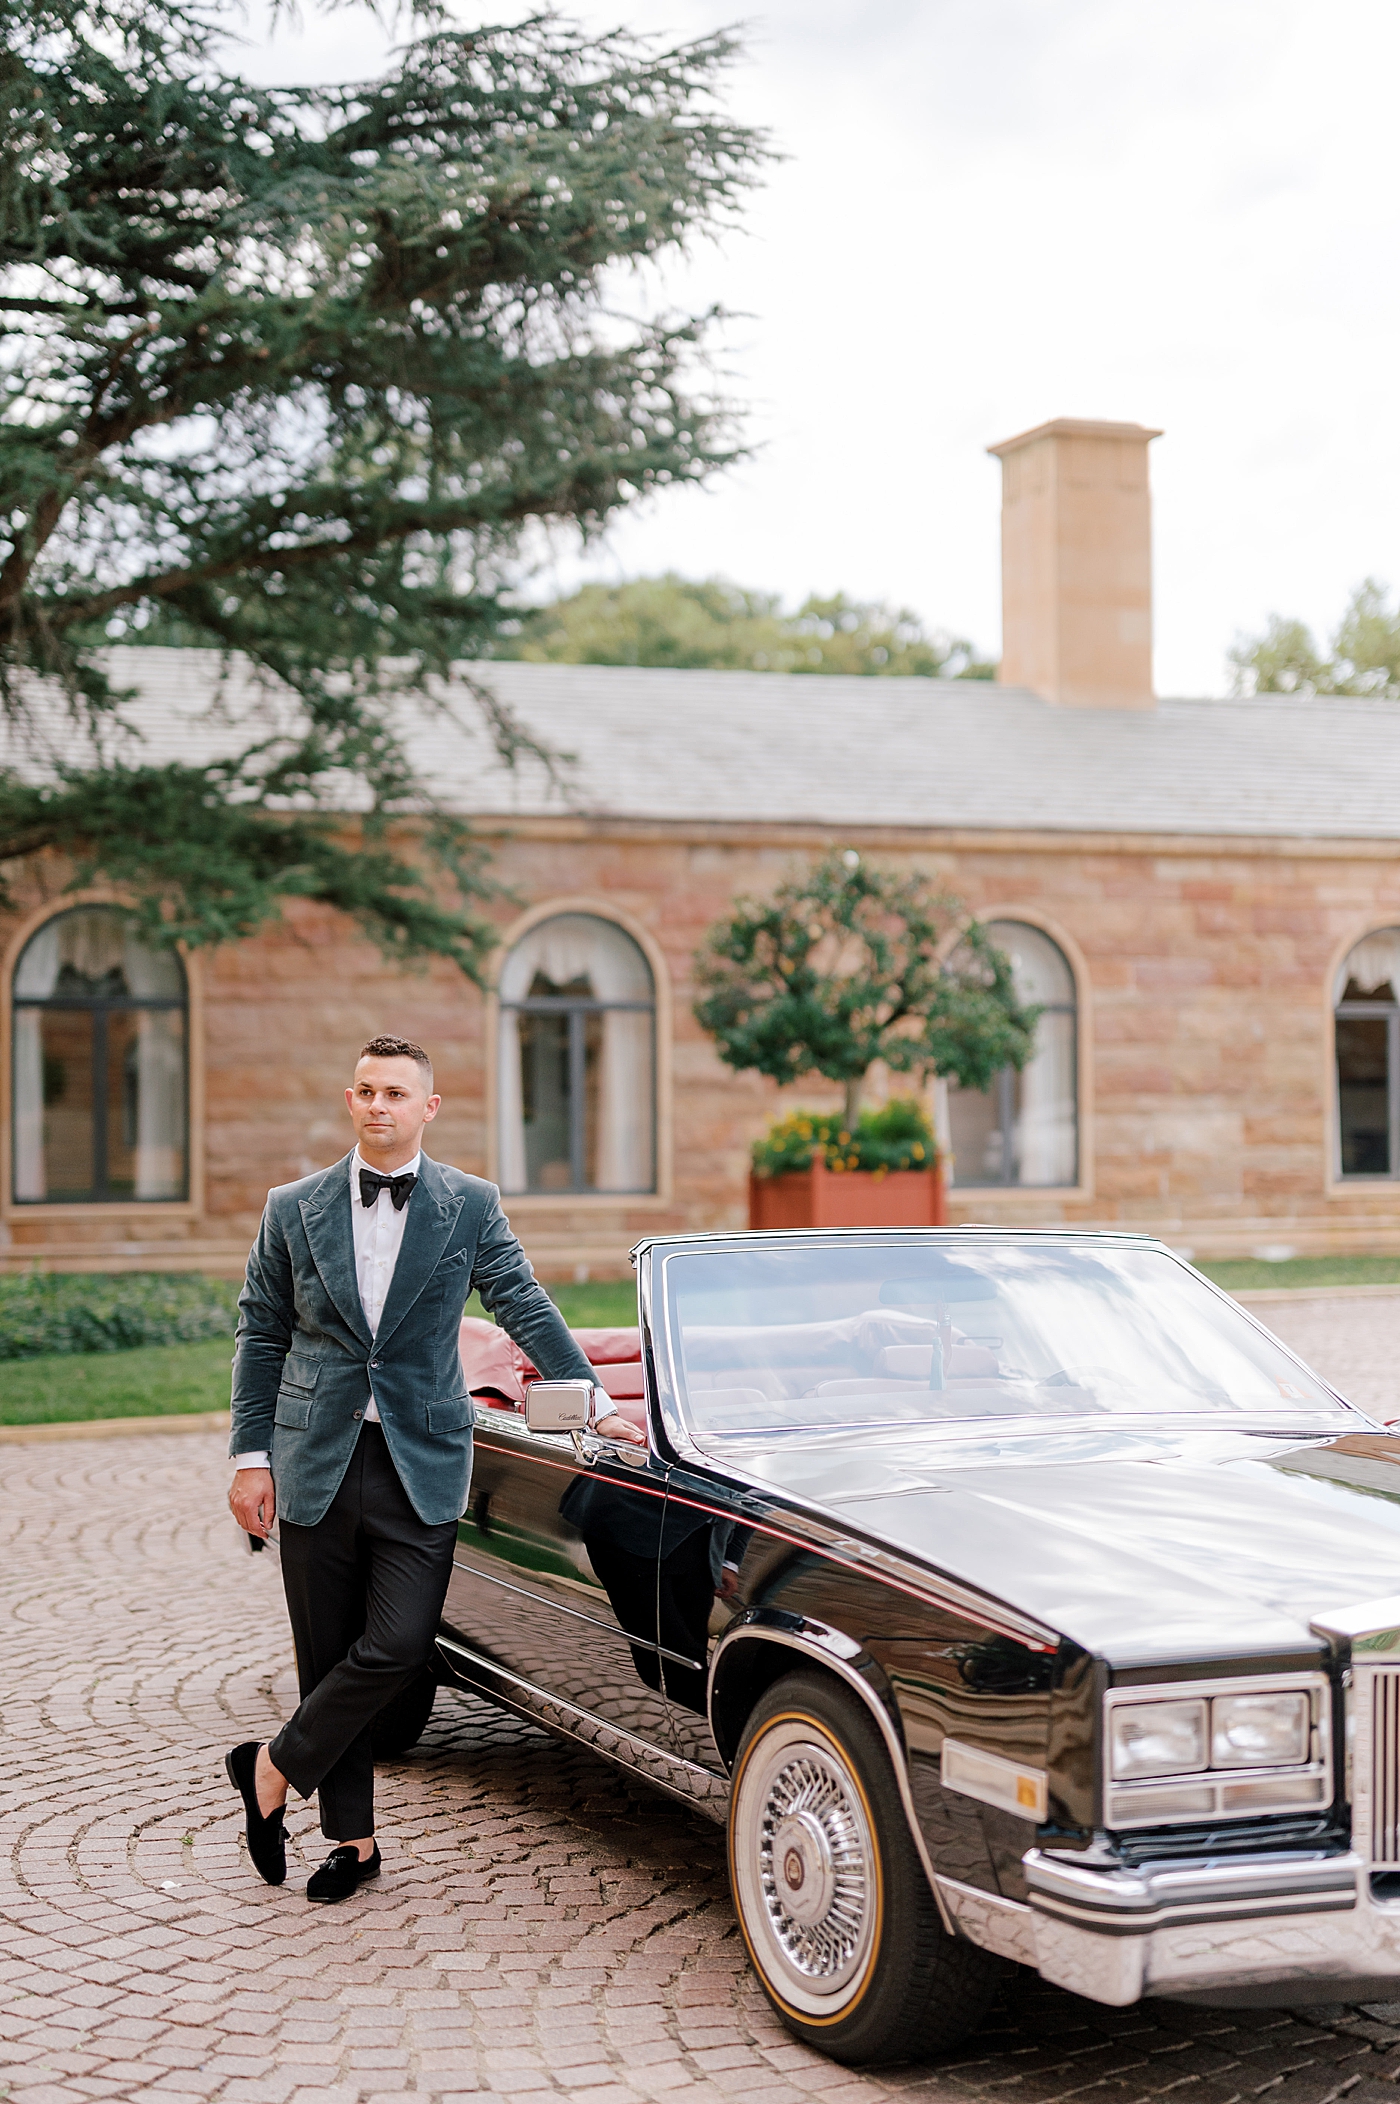 Groom in velvet blue tux by a vintage car | Image by Hope Helmuth Photography